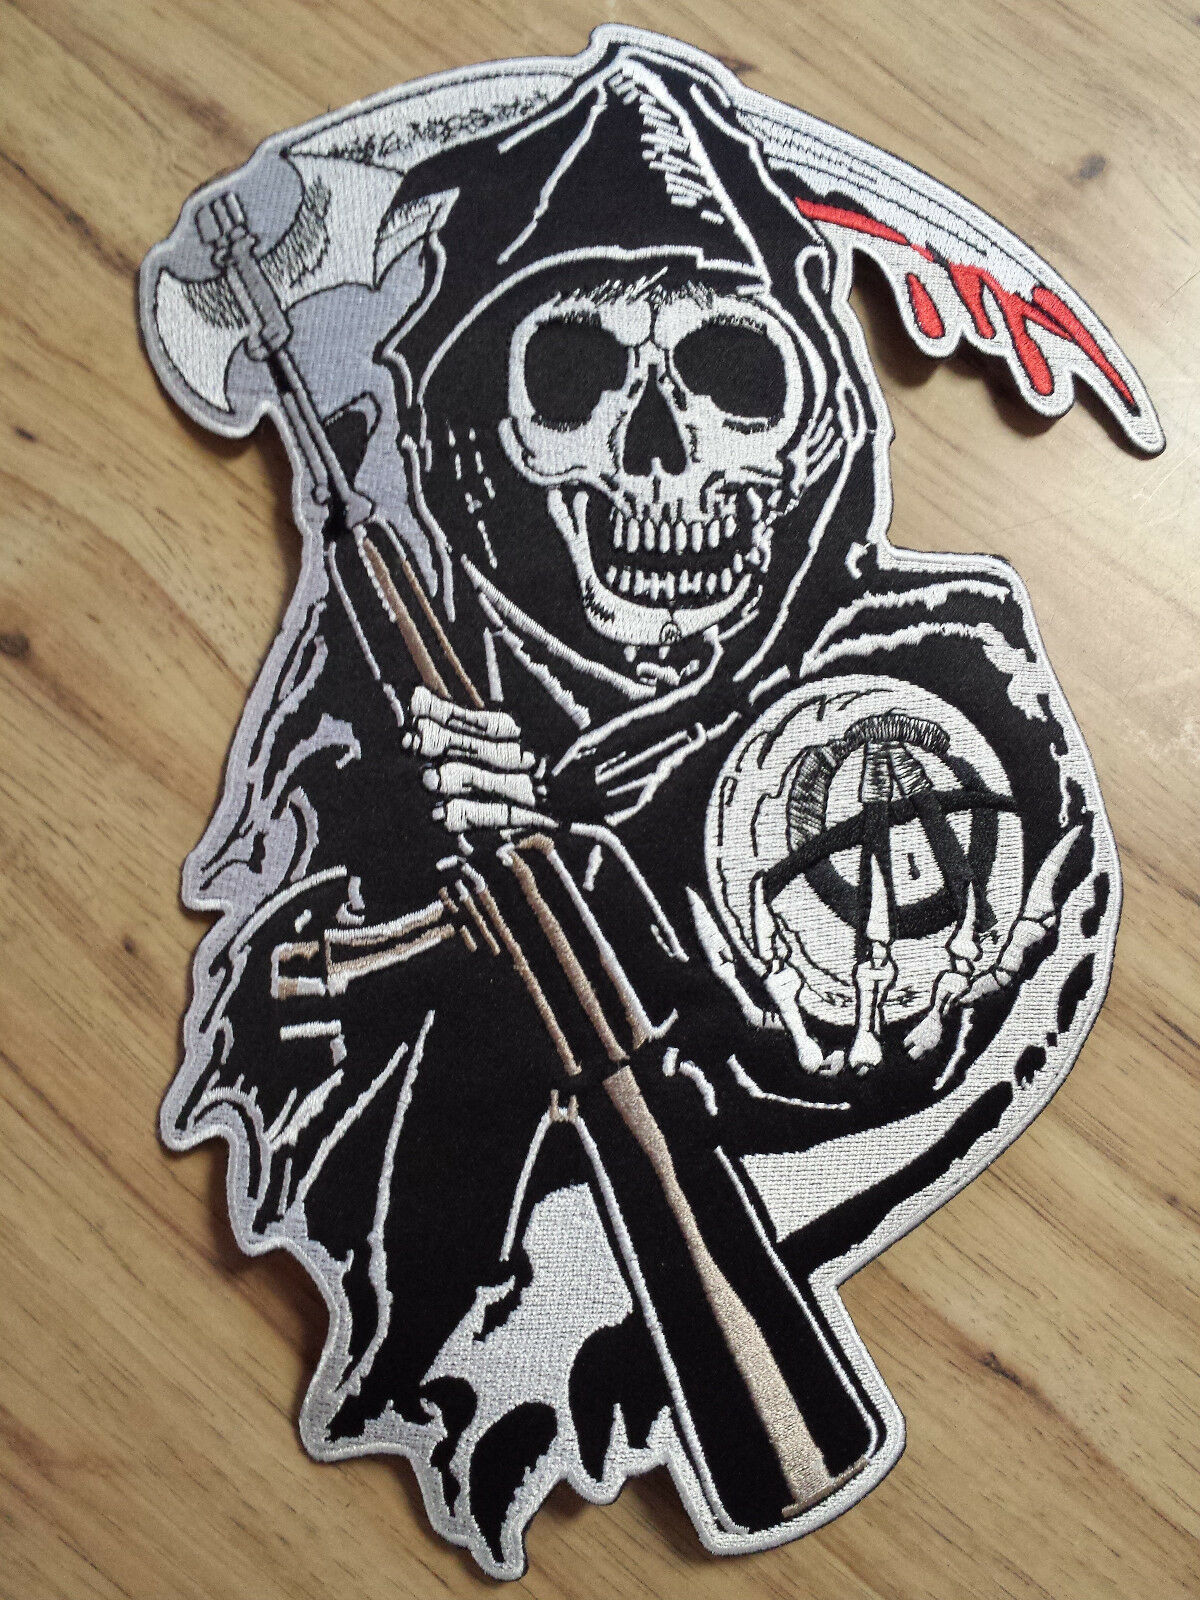 Sons Of Anarchy Official Licensed Rocker & Jacket Patch Sets *buy 1 Get 1 Free*